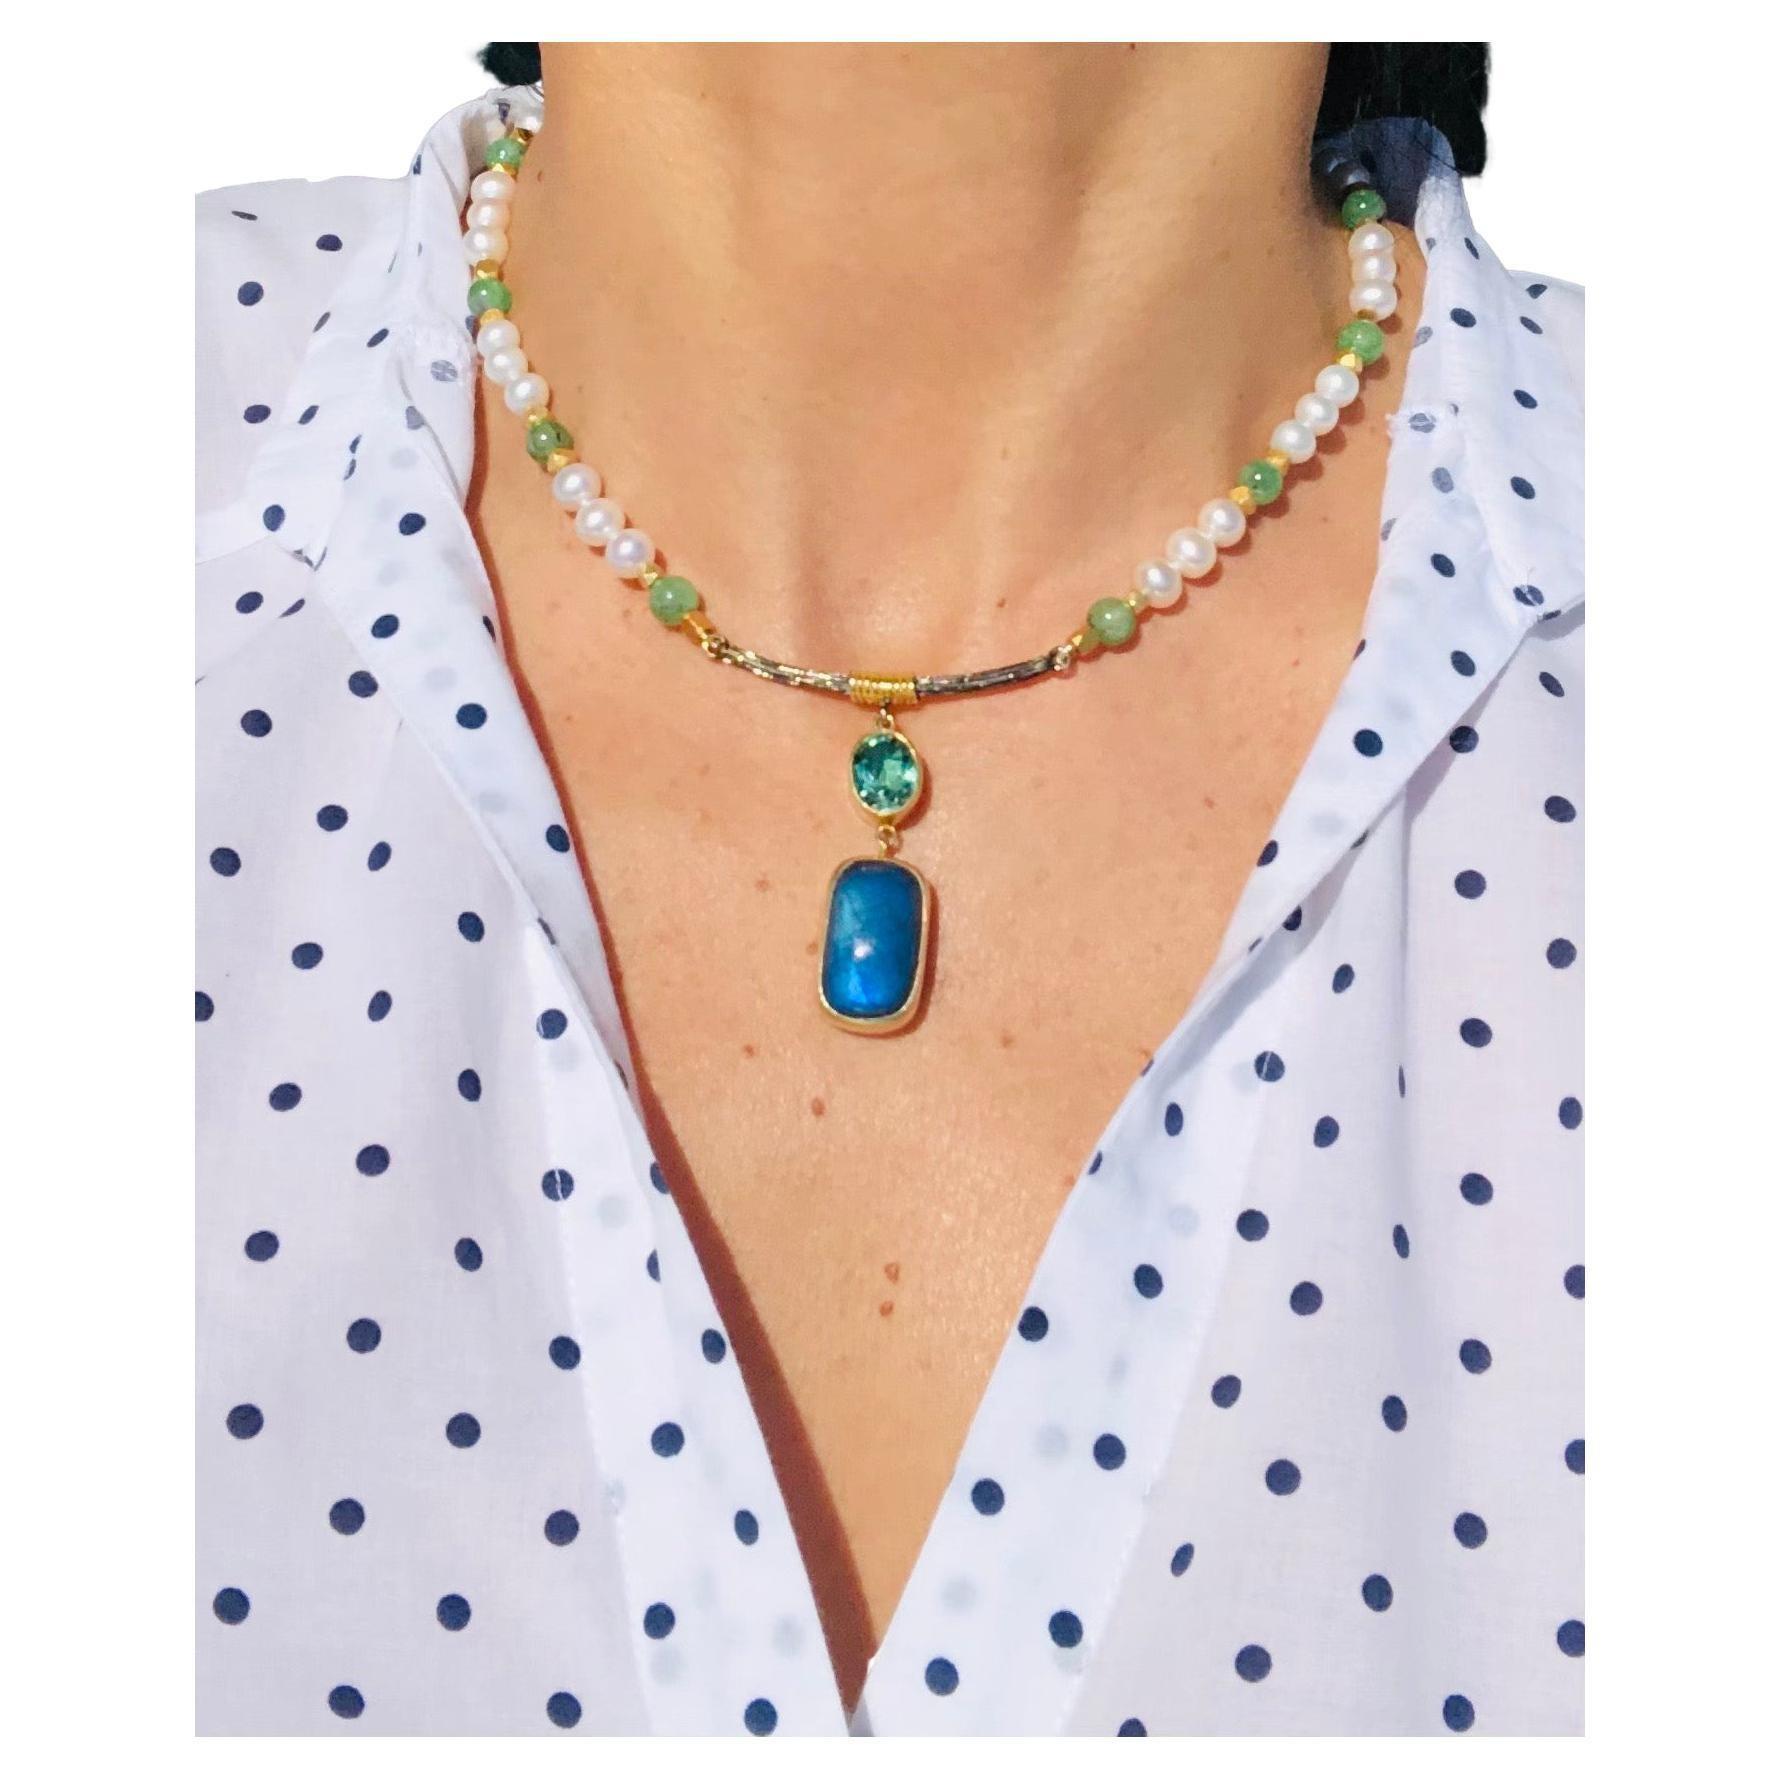 A.Jeschel Pendant Necklace with Pearls and Emerald beads is dreamy. For Sale